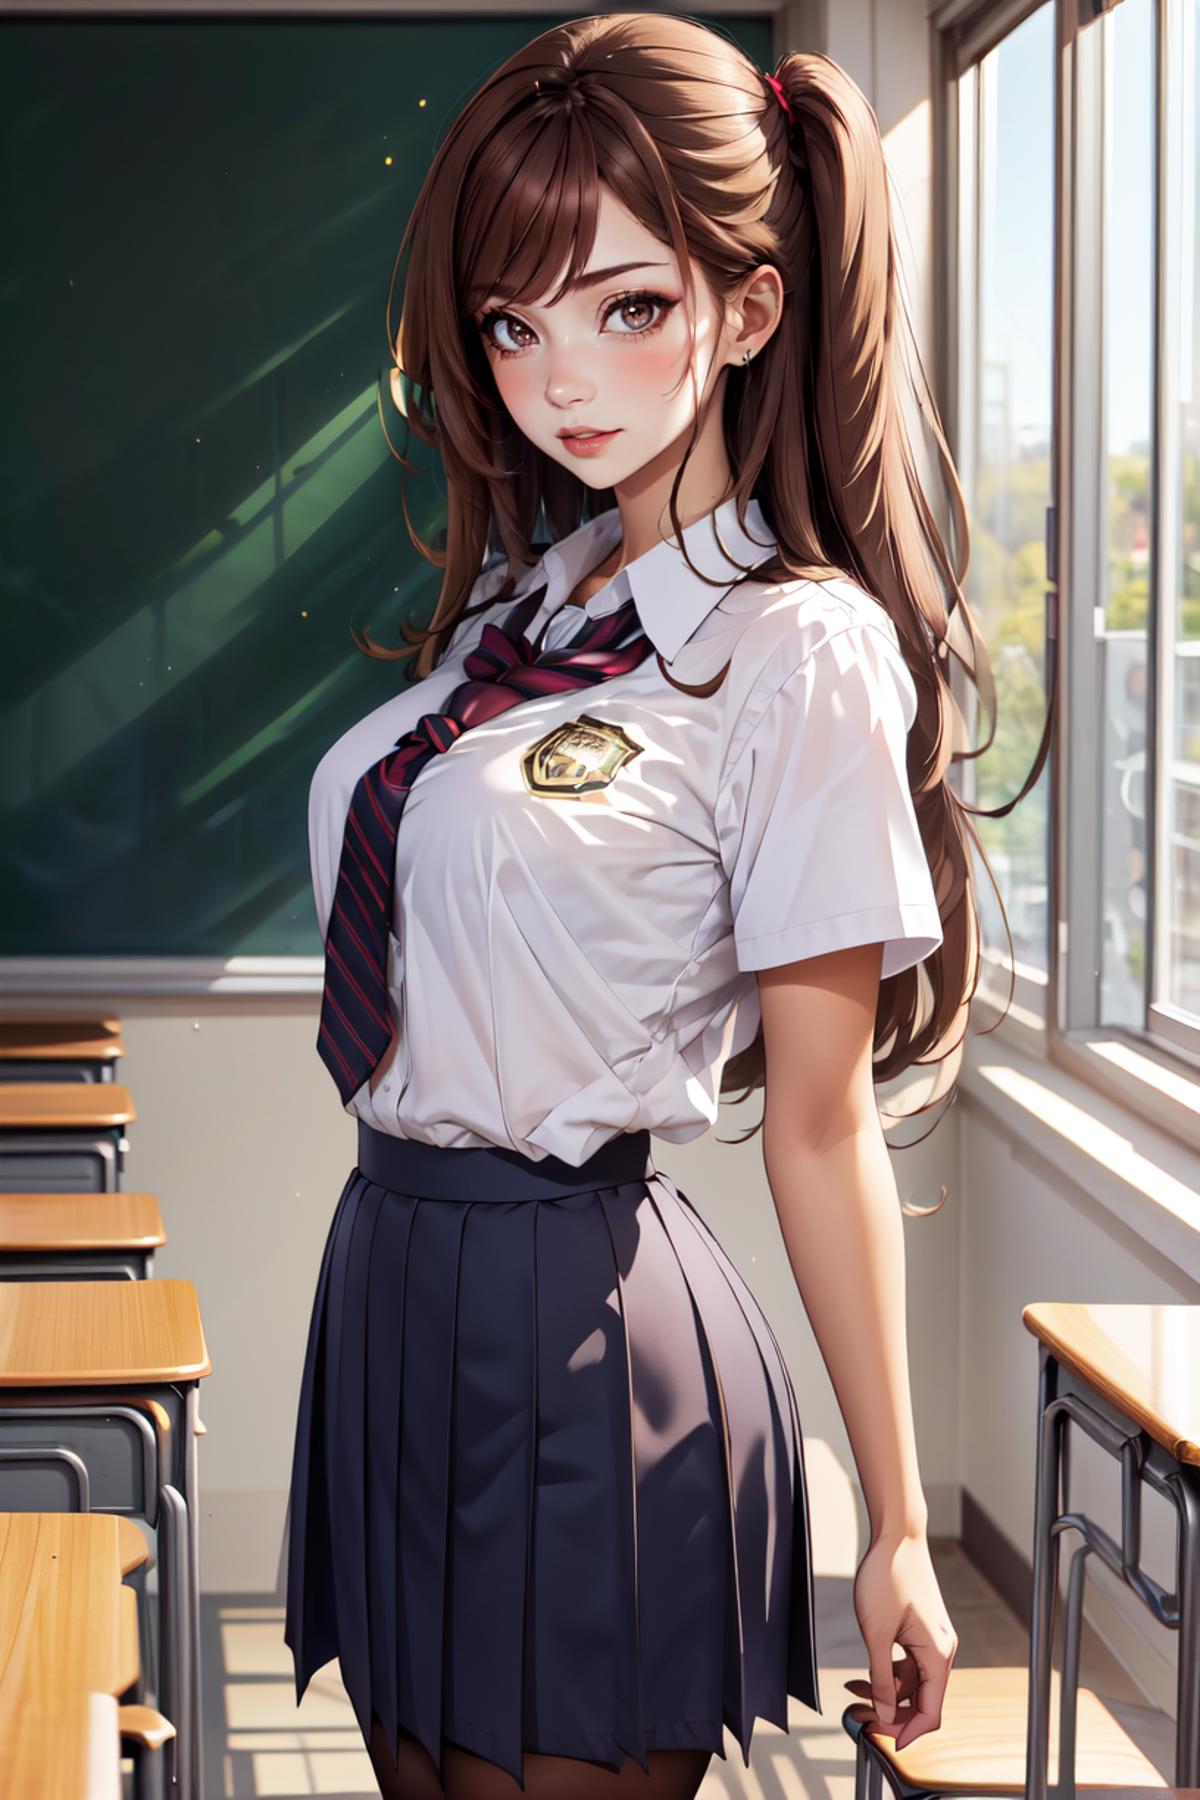 Anime girl in white shirt and black tie standing in front of a window.